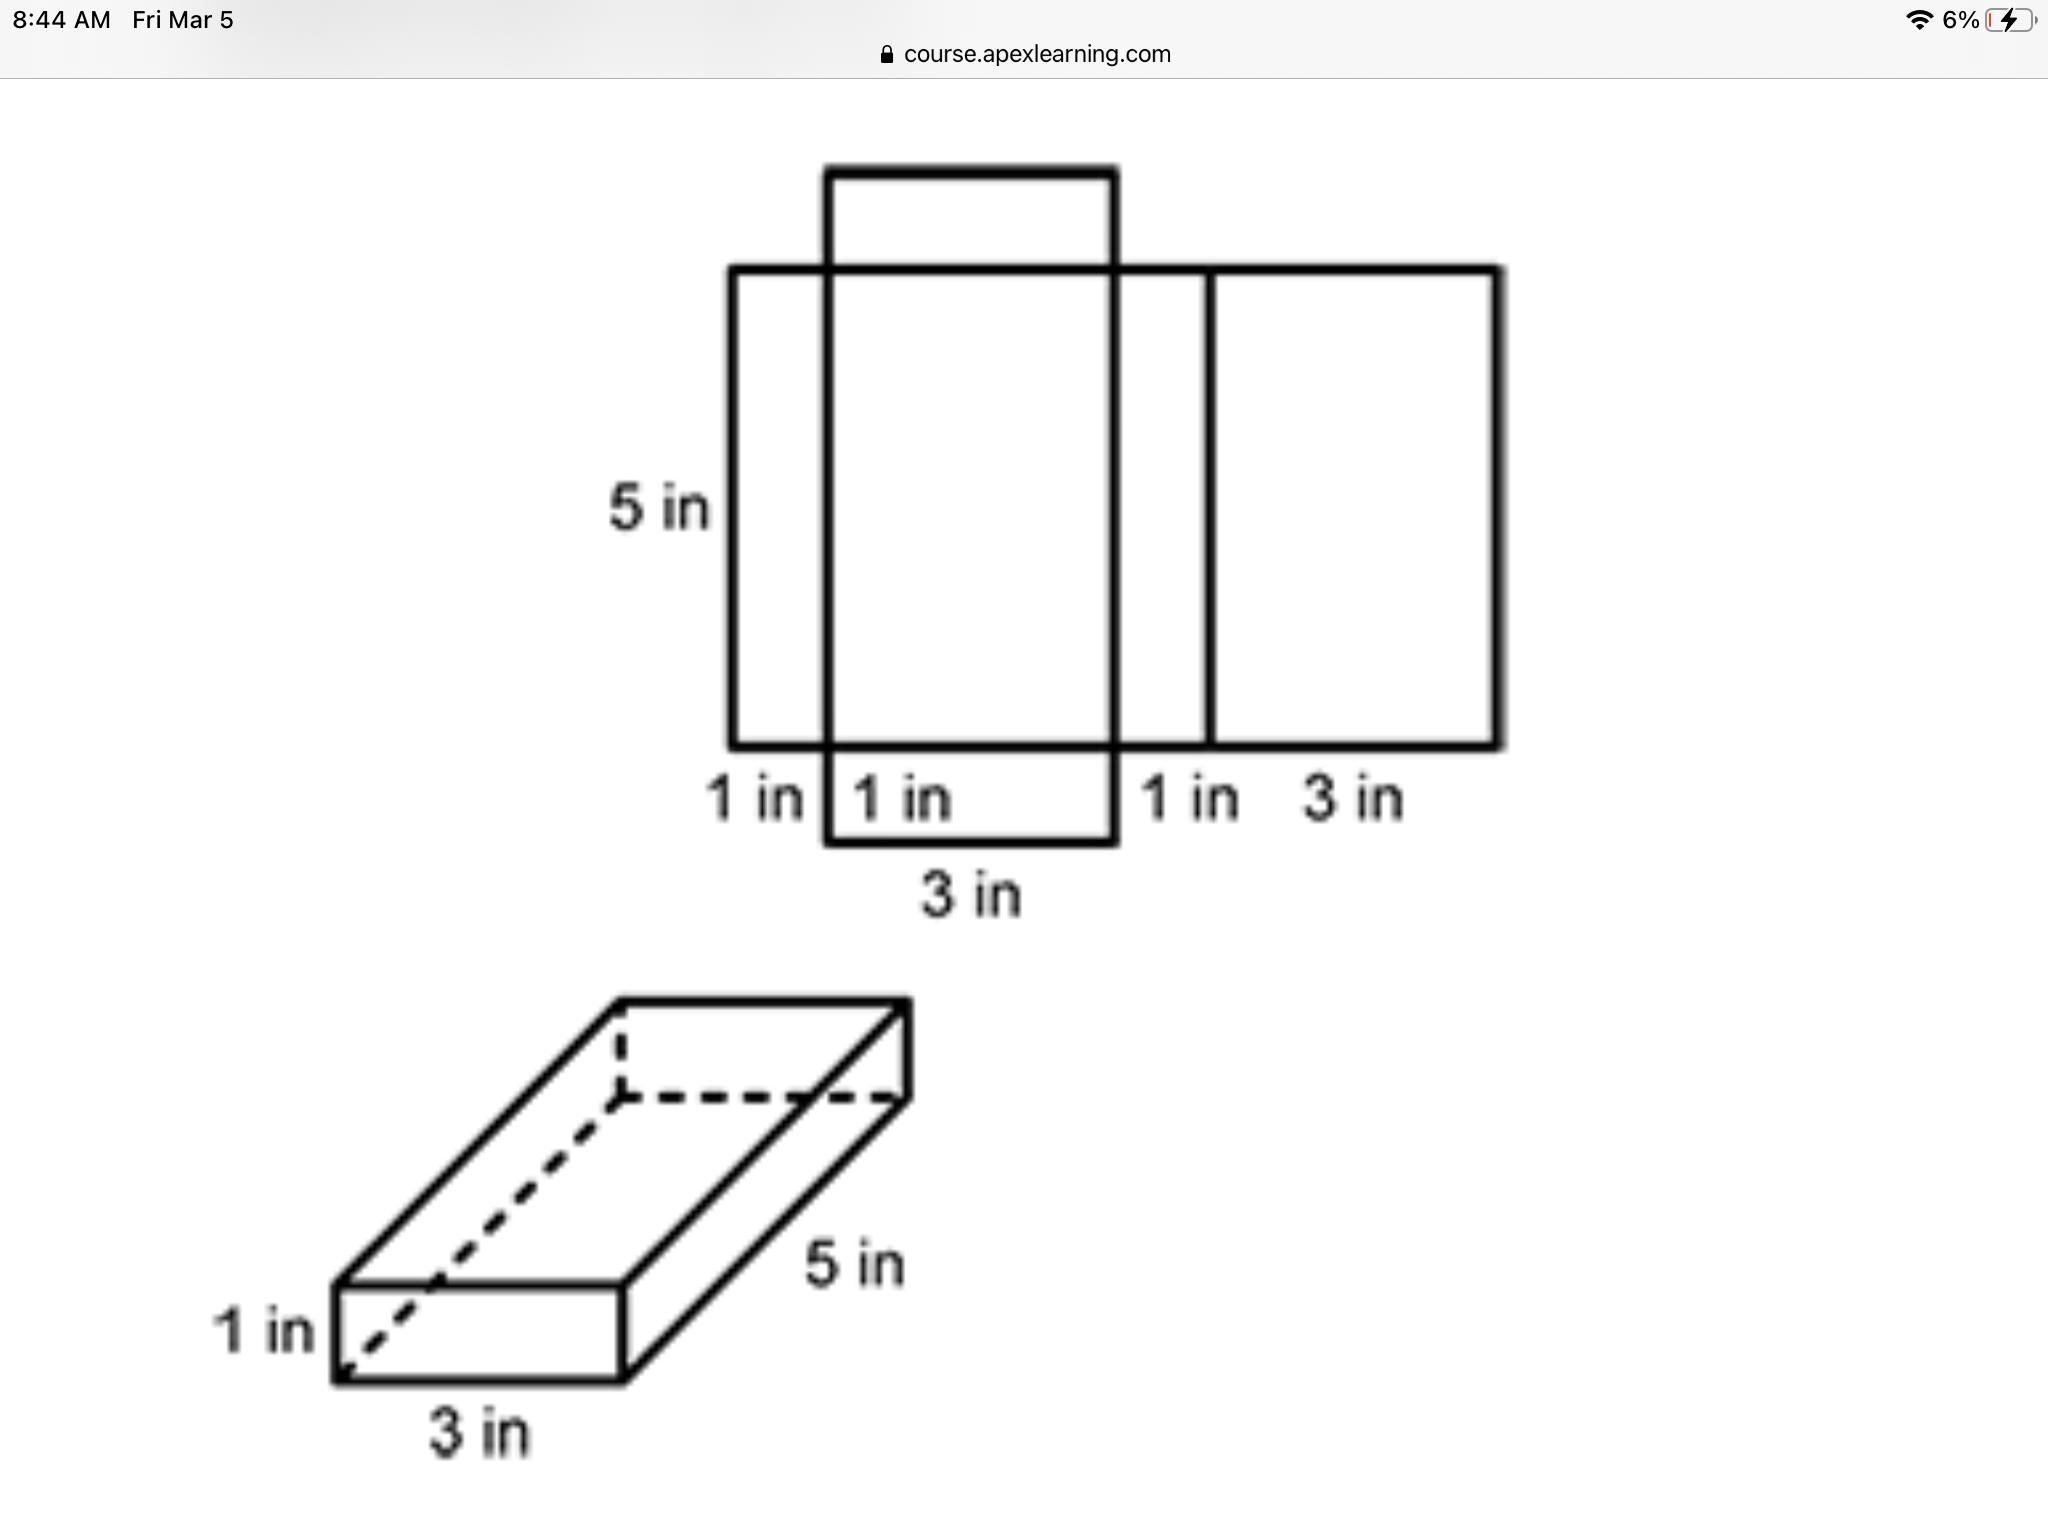 Giving Brainlest And 20 Points What Is The Surface Area Of The Solid?A.46 Square InchesB.15 Square InchesC.40